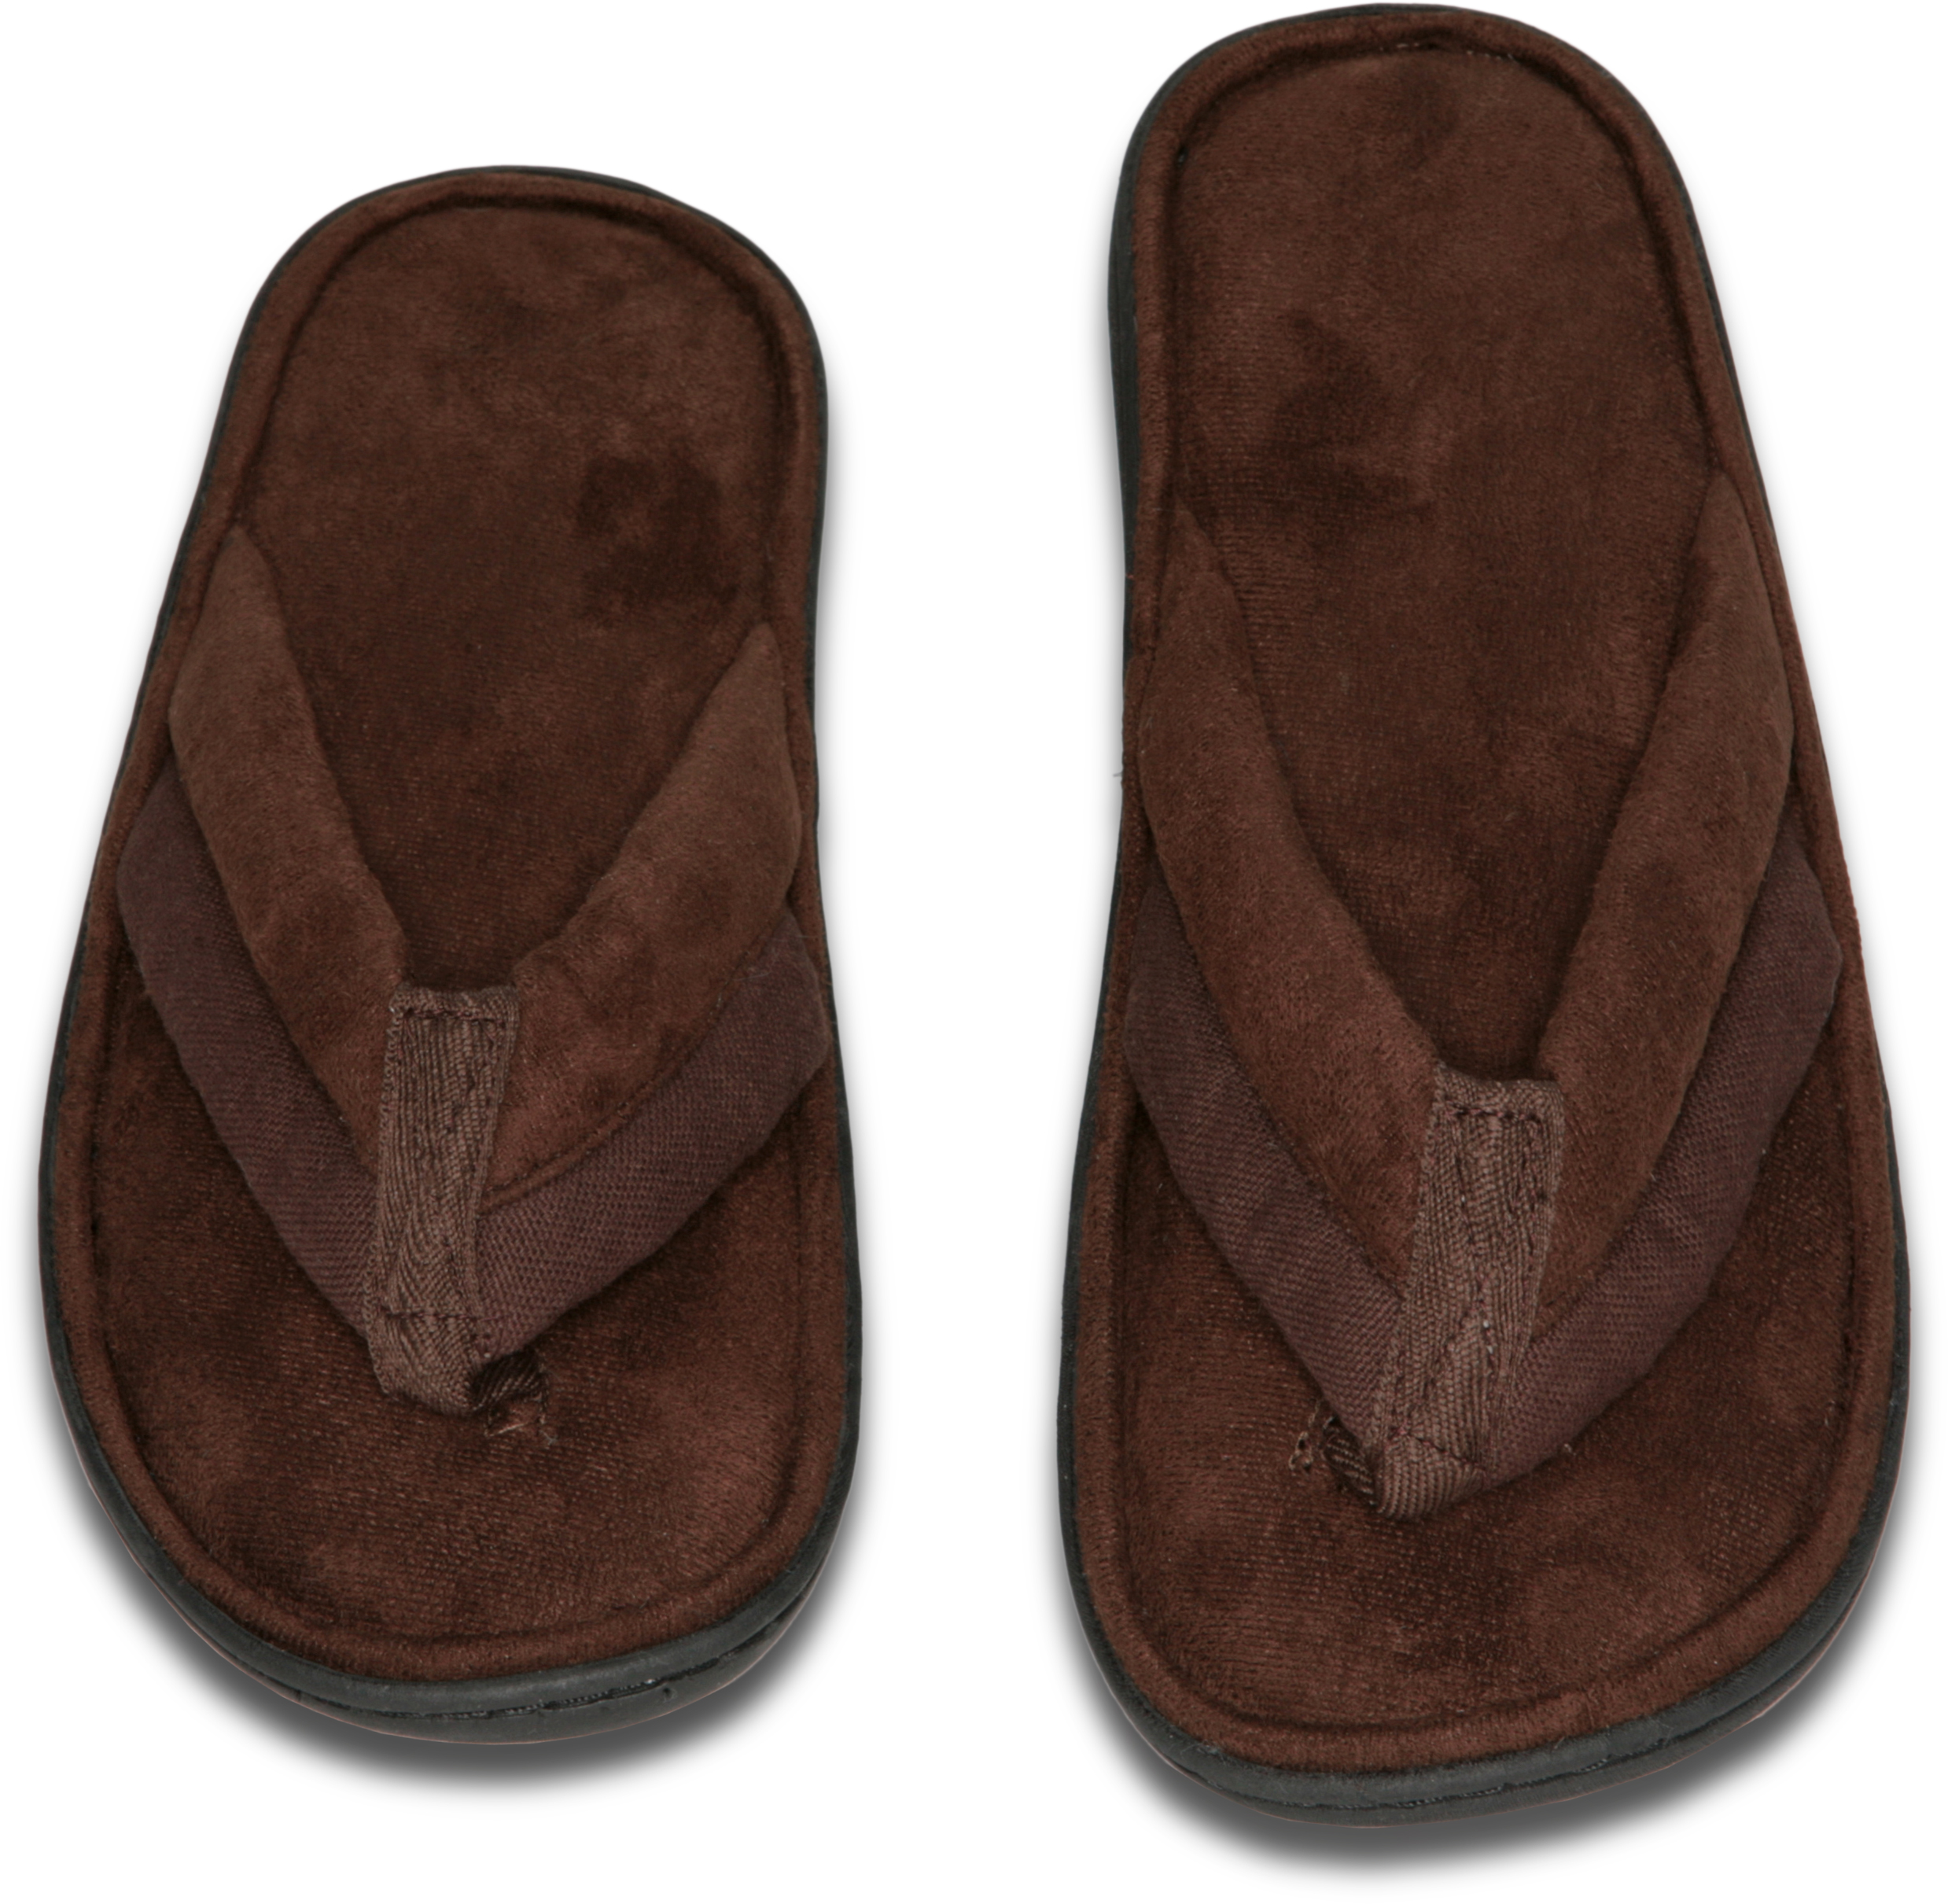 Deluxe Comfort Mens Memory Foam Slipper, Size 11-12 - Soft Linen 120D SBR Insole & Rubber Outsole - Pure Suede Shoes - Non Marking Sole - Mens Slippers, Brown - image 4 of 5